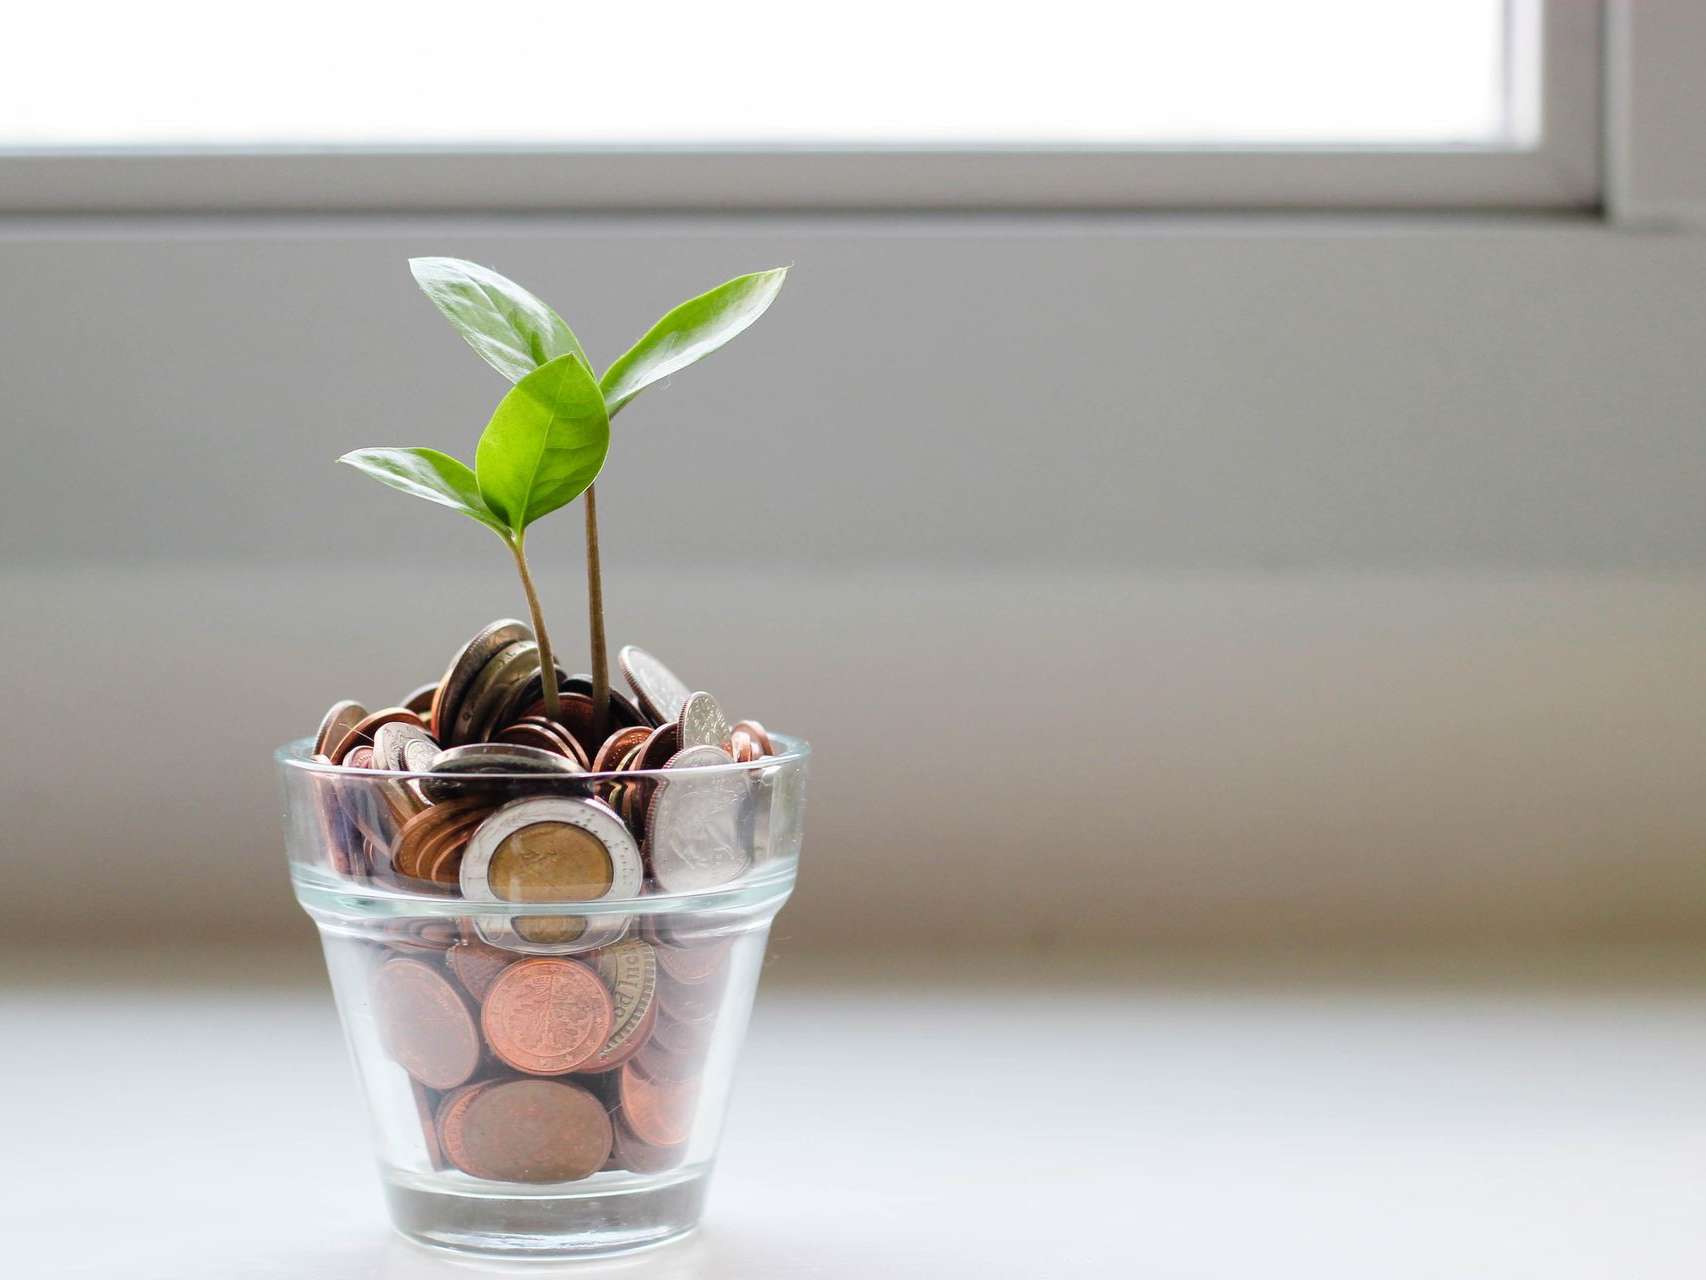 Plant growing out of a glass filled with coins